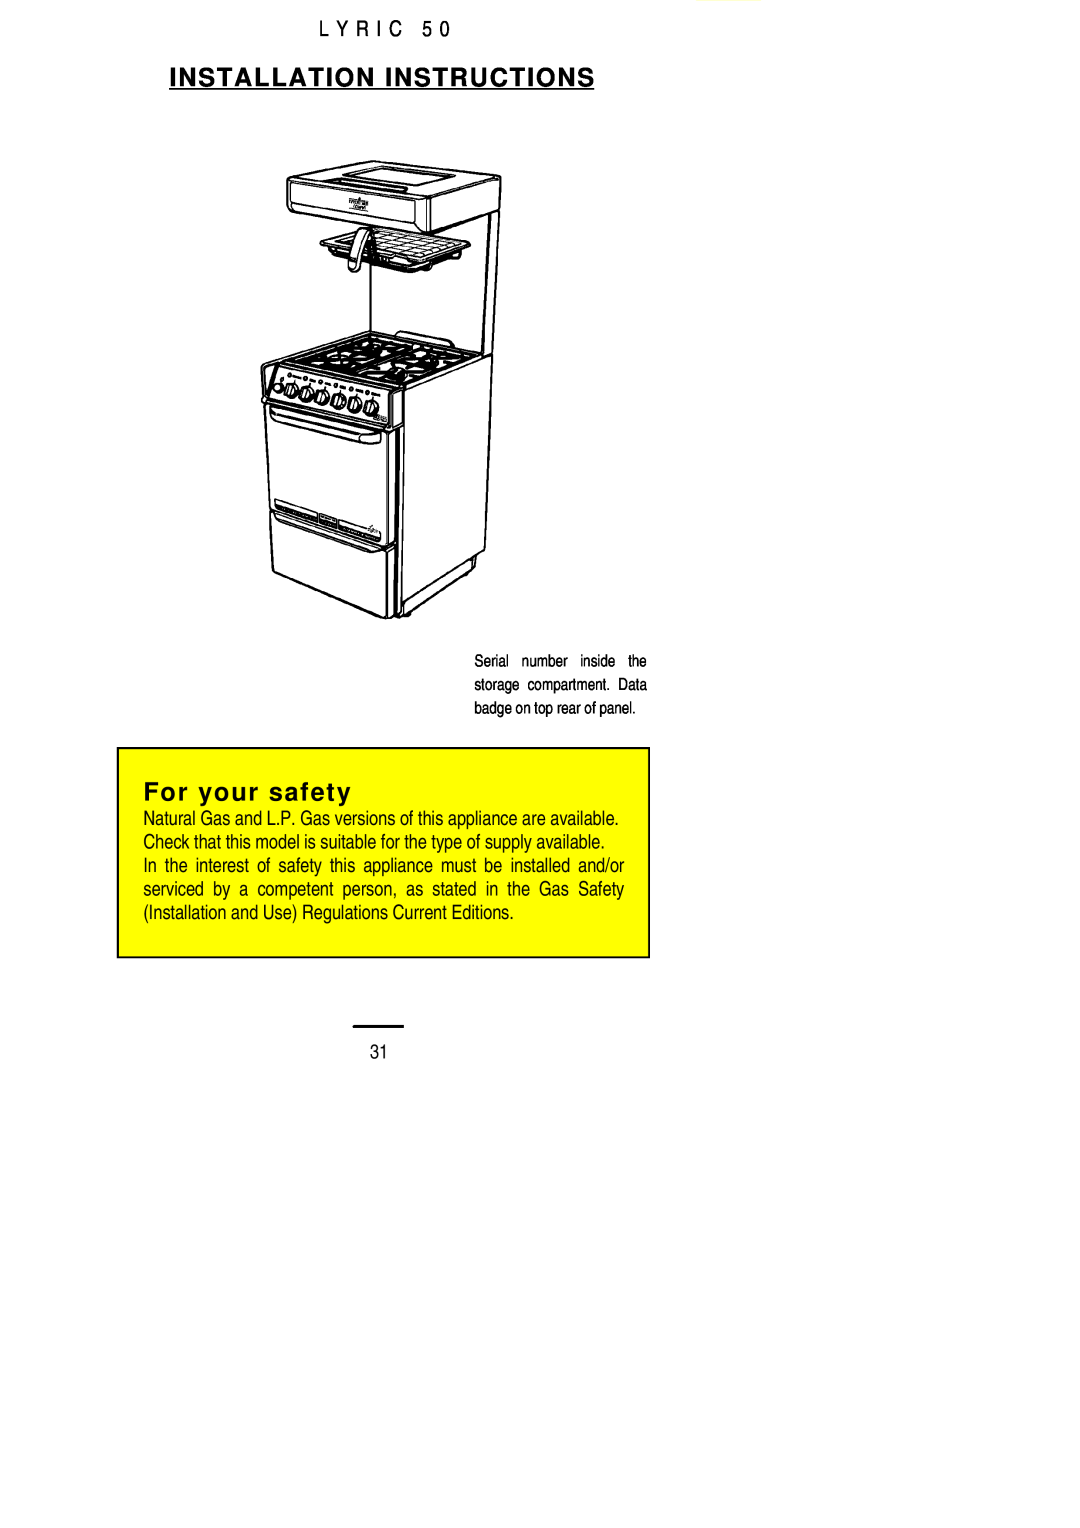 Electrolux LYRIC50 installation instructions Installation Instructions, For your safety, L Y R I C 